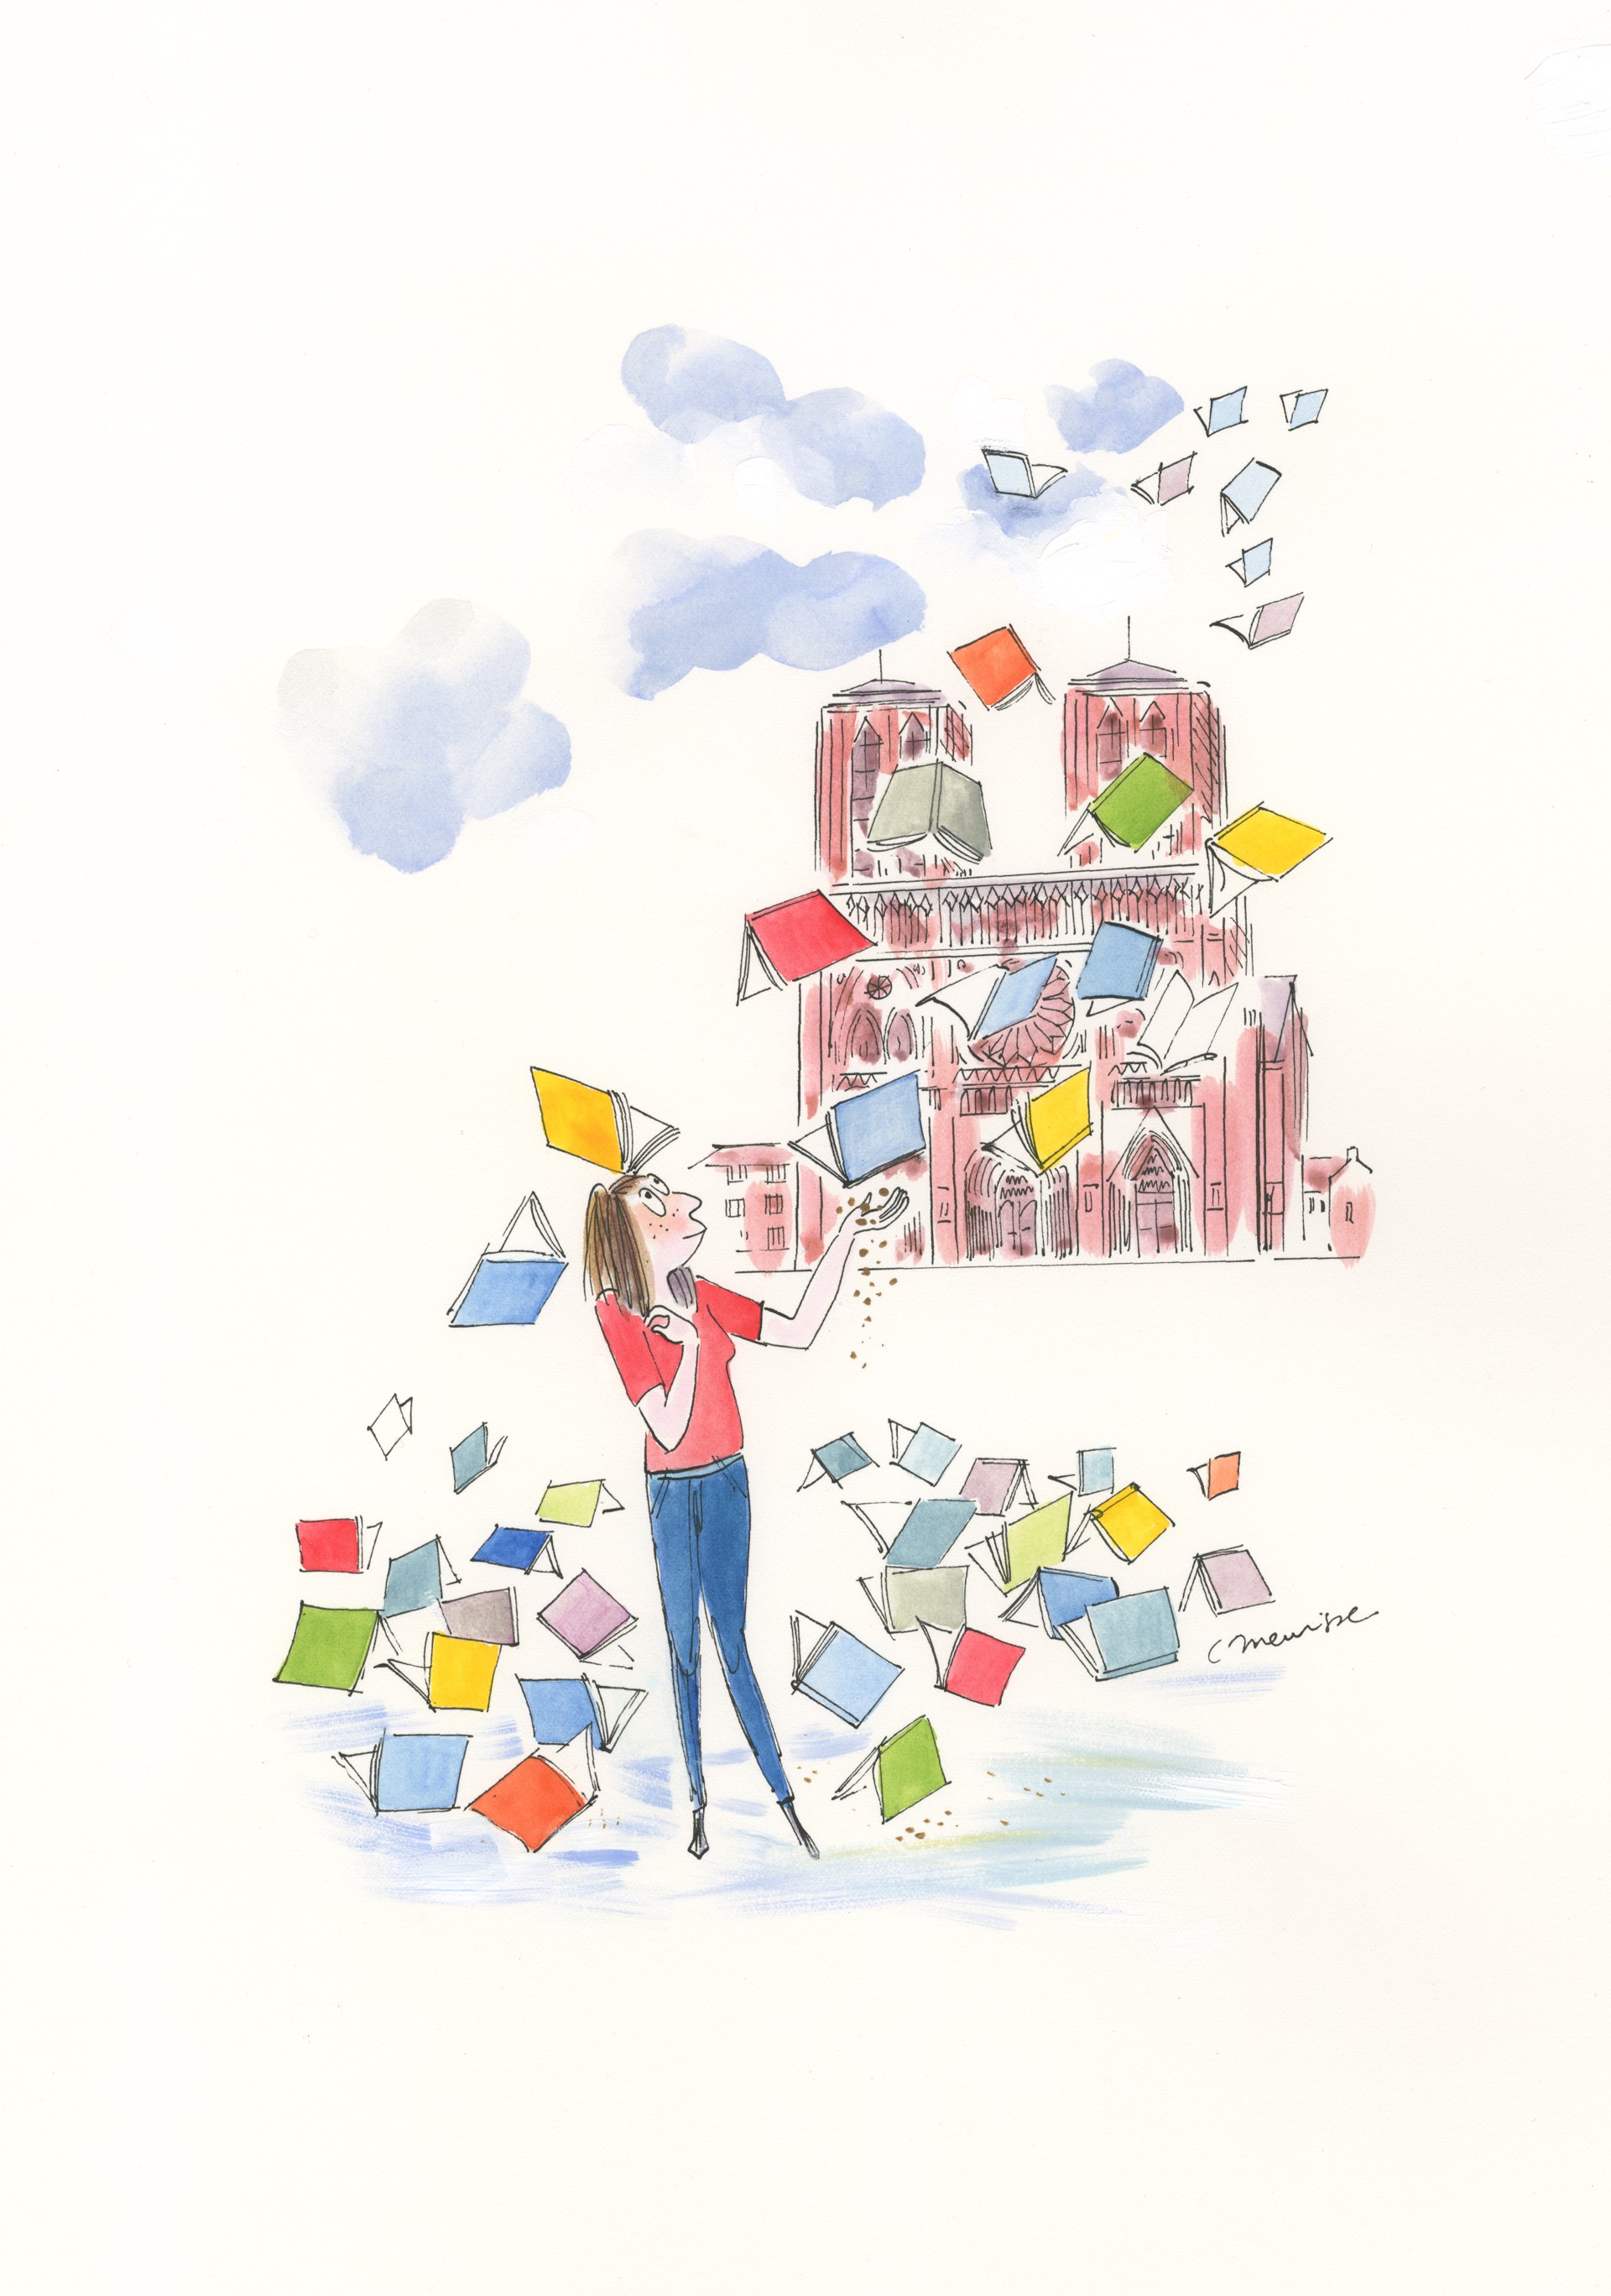 Le Pari des libraires (Poster created for National Library Week) by Catherine Meurisse